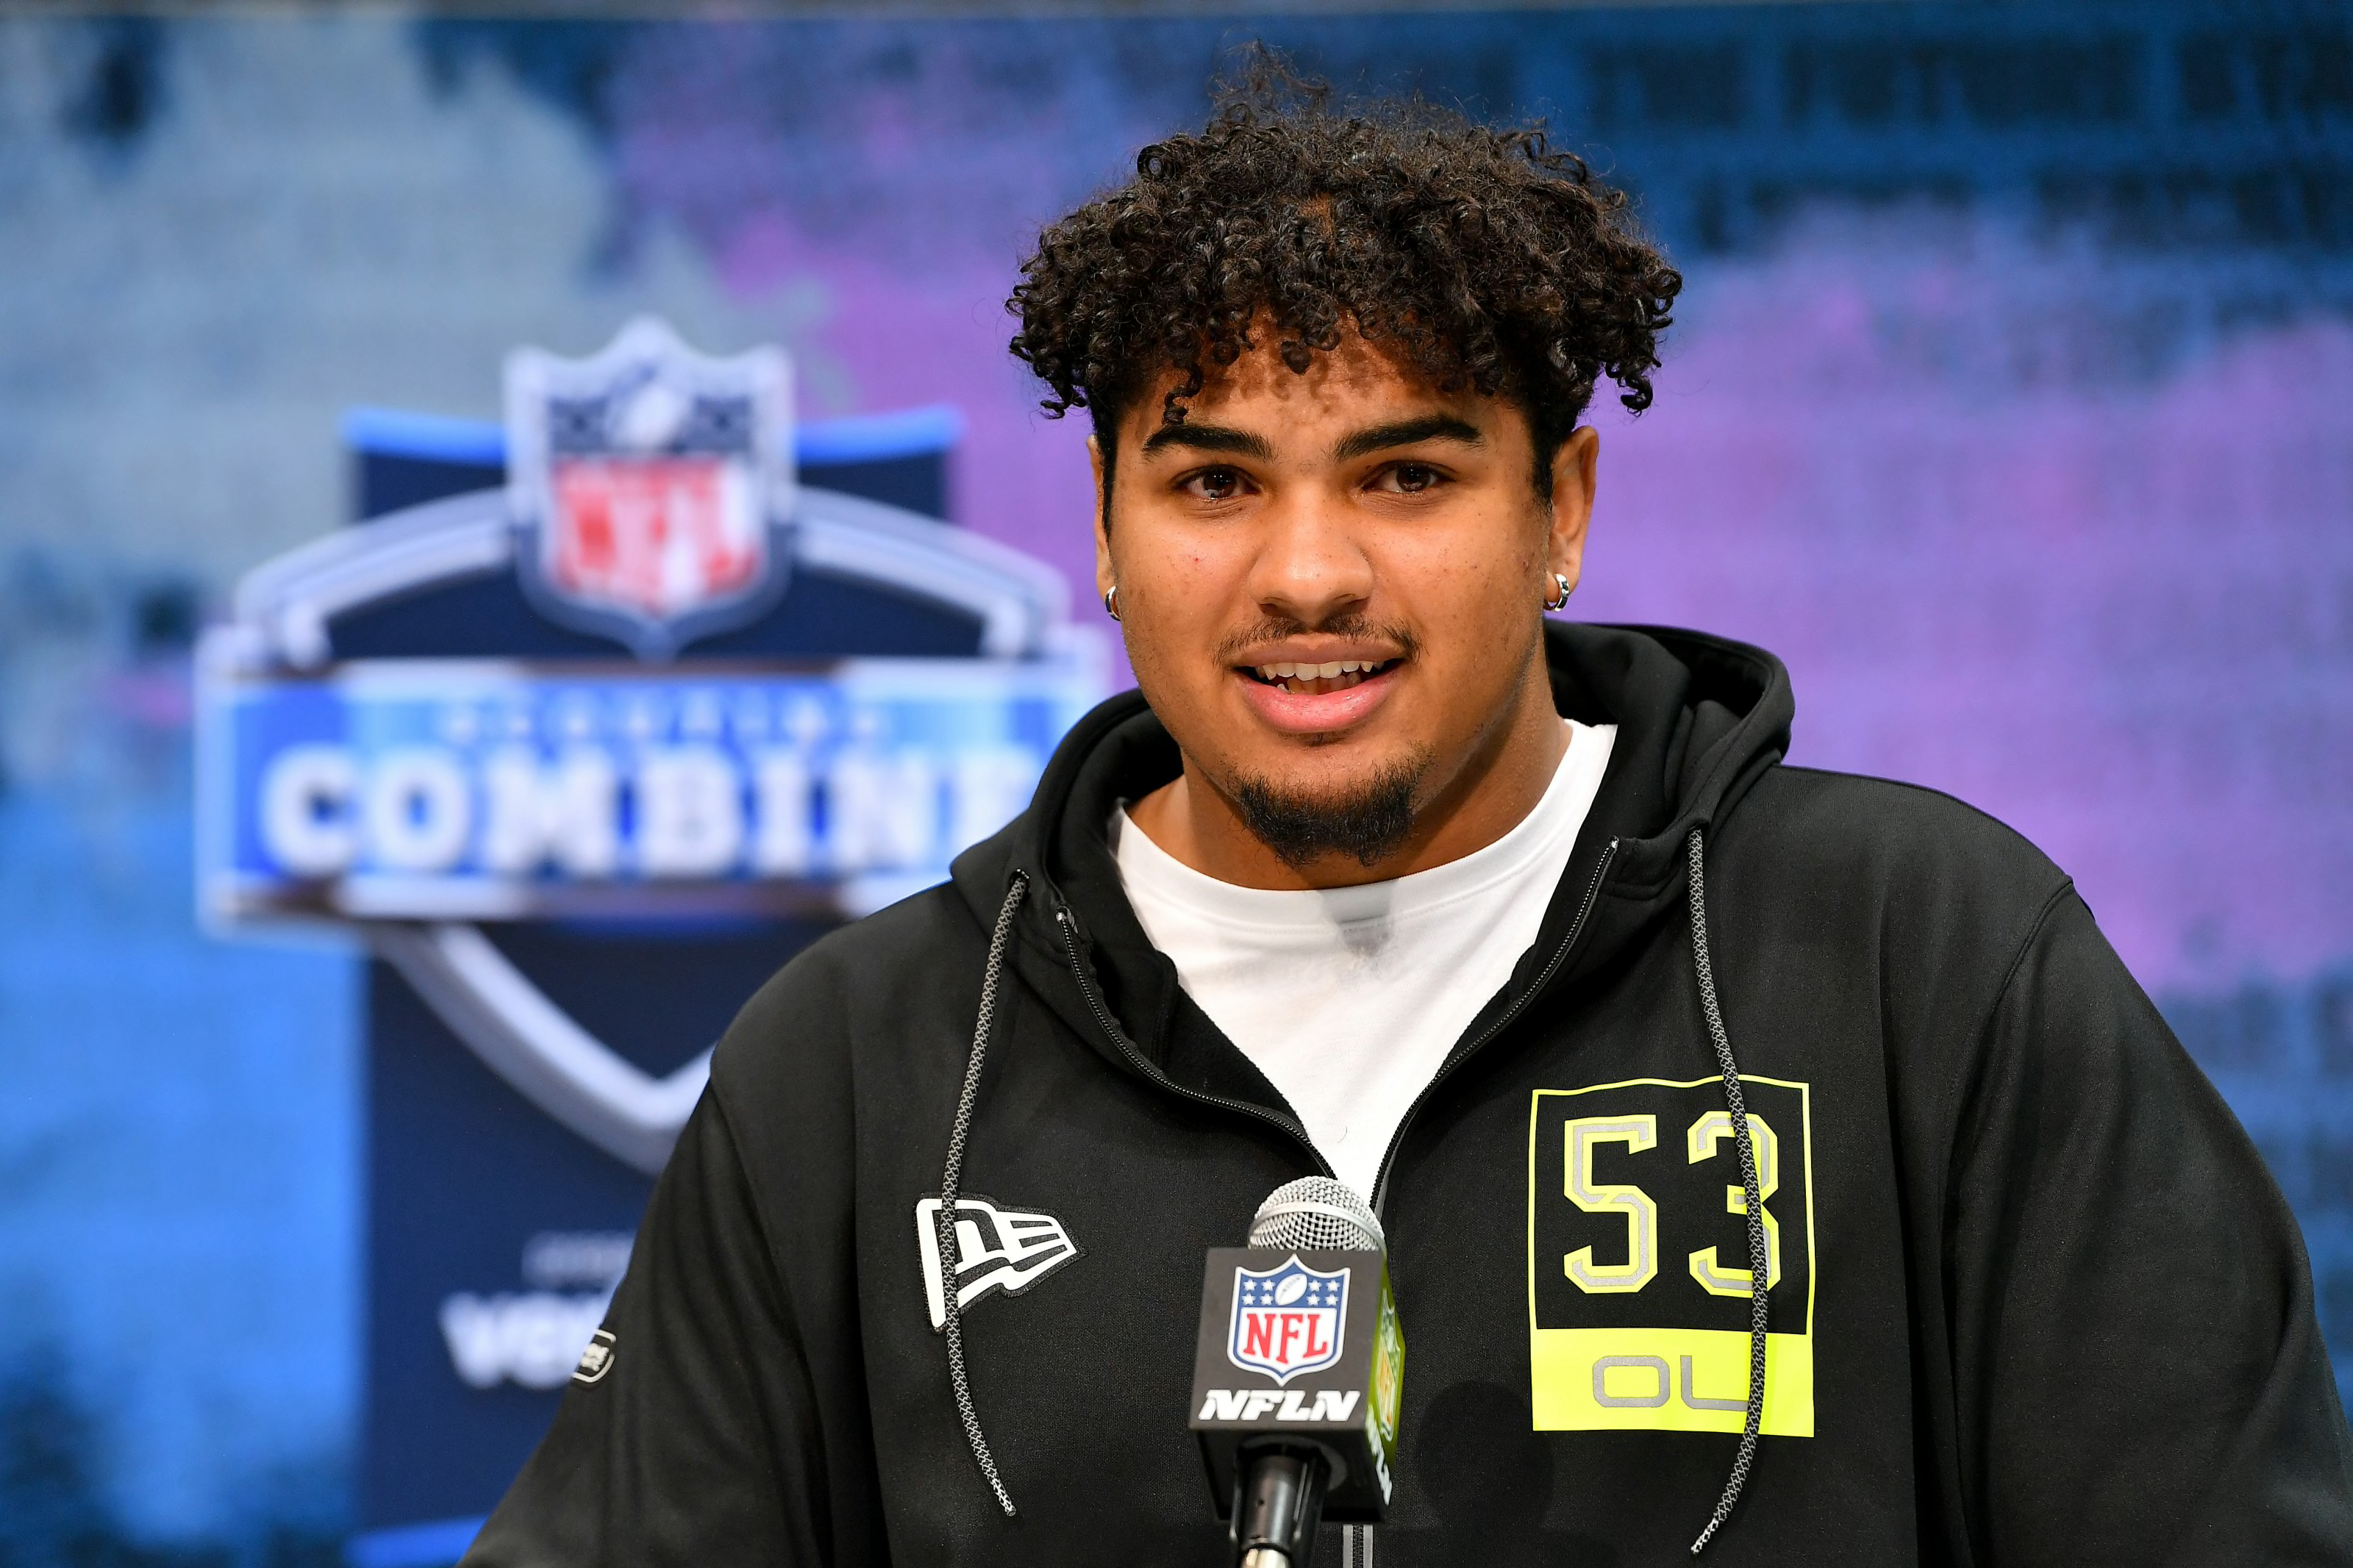 Arizona Cardinals 7-round NFL mock draft: Keeping up with NFC West - Page 2